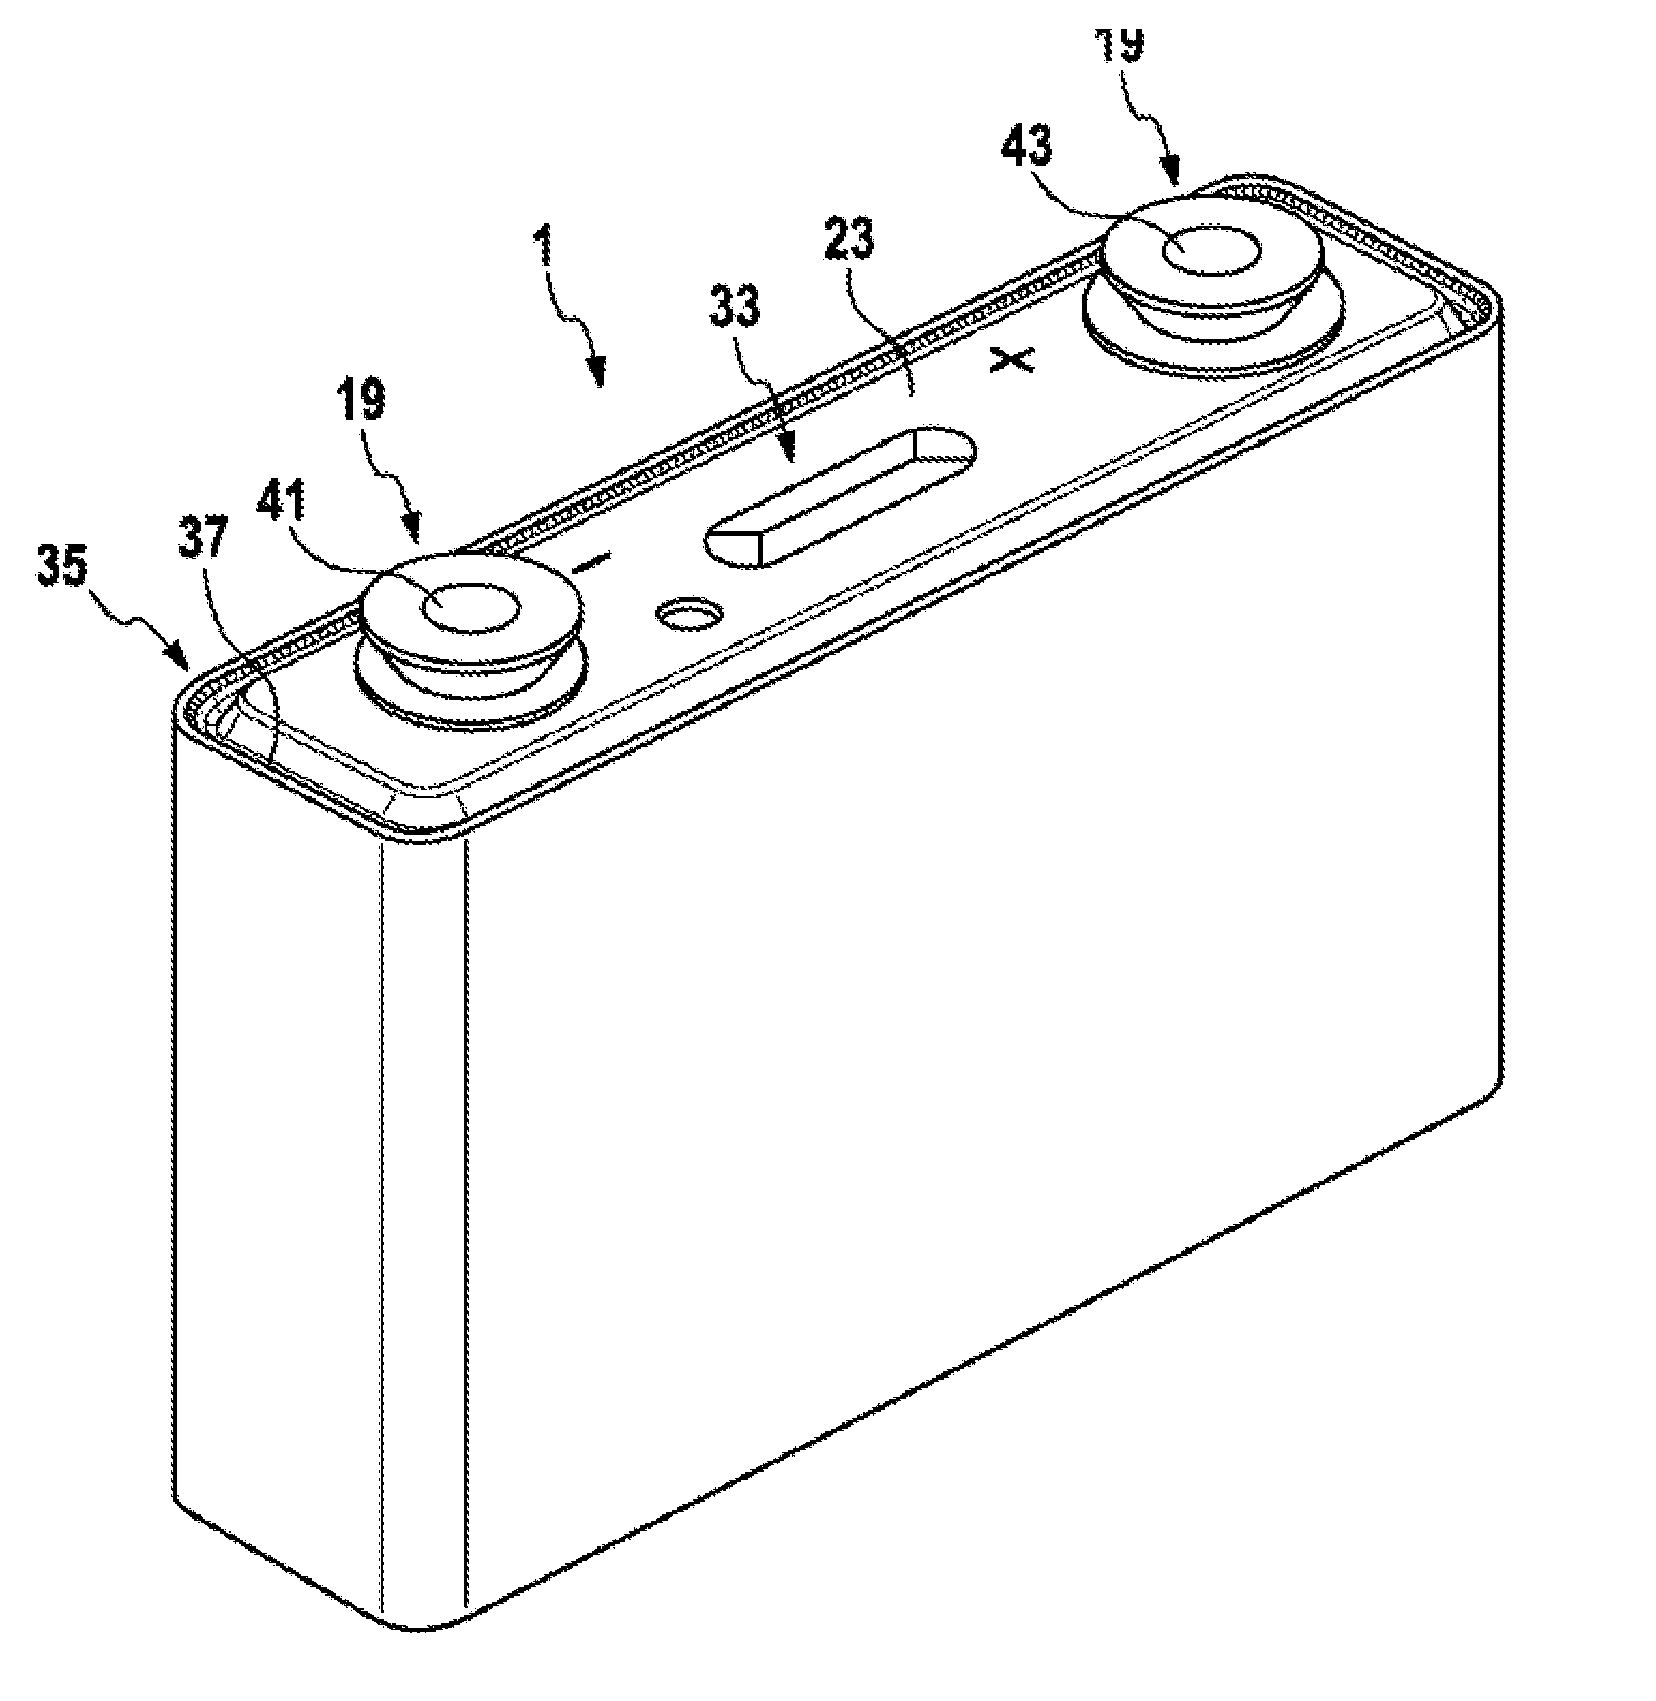 Battery cell comprising a housing covering plate having a raised central region